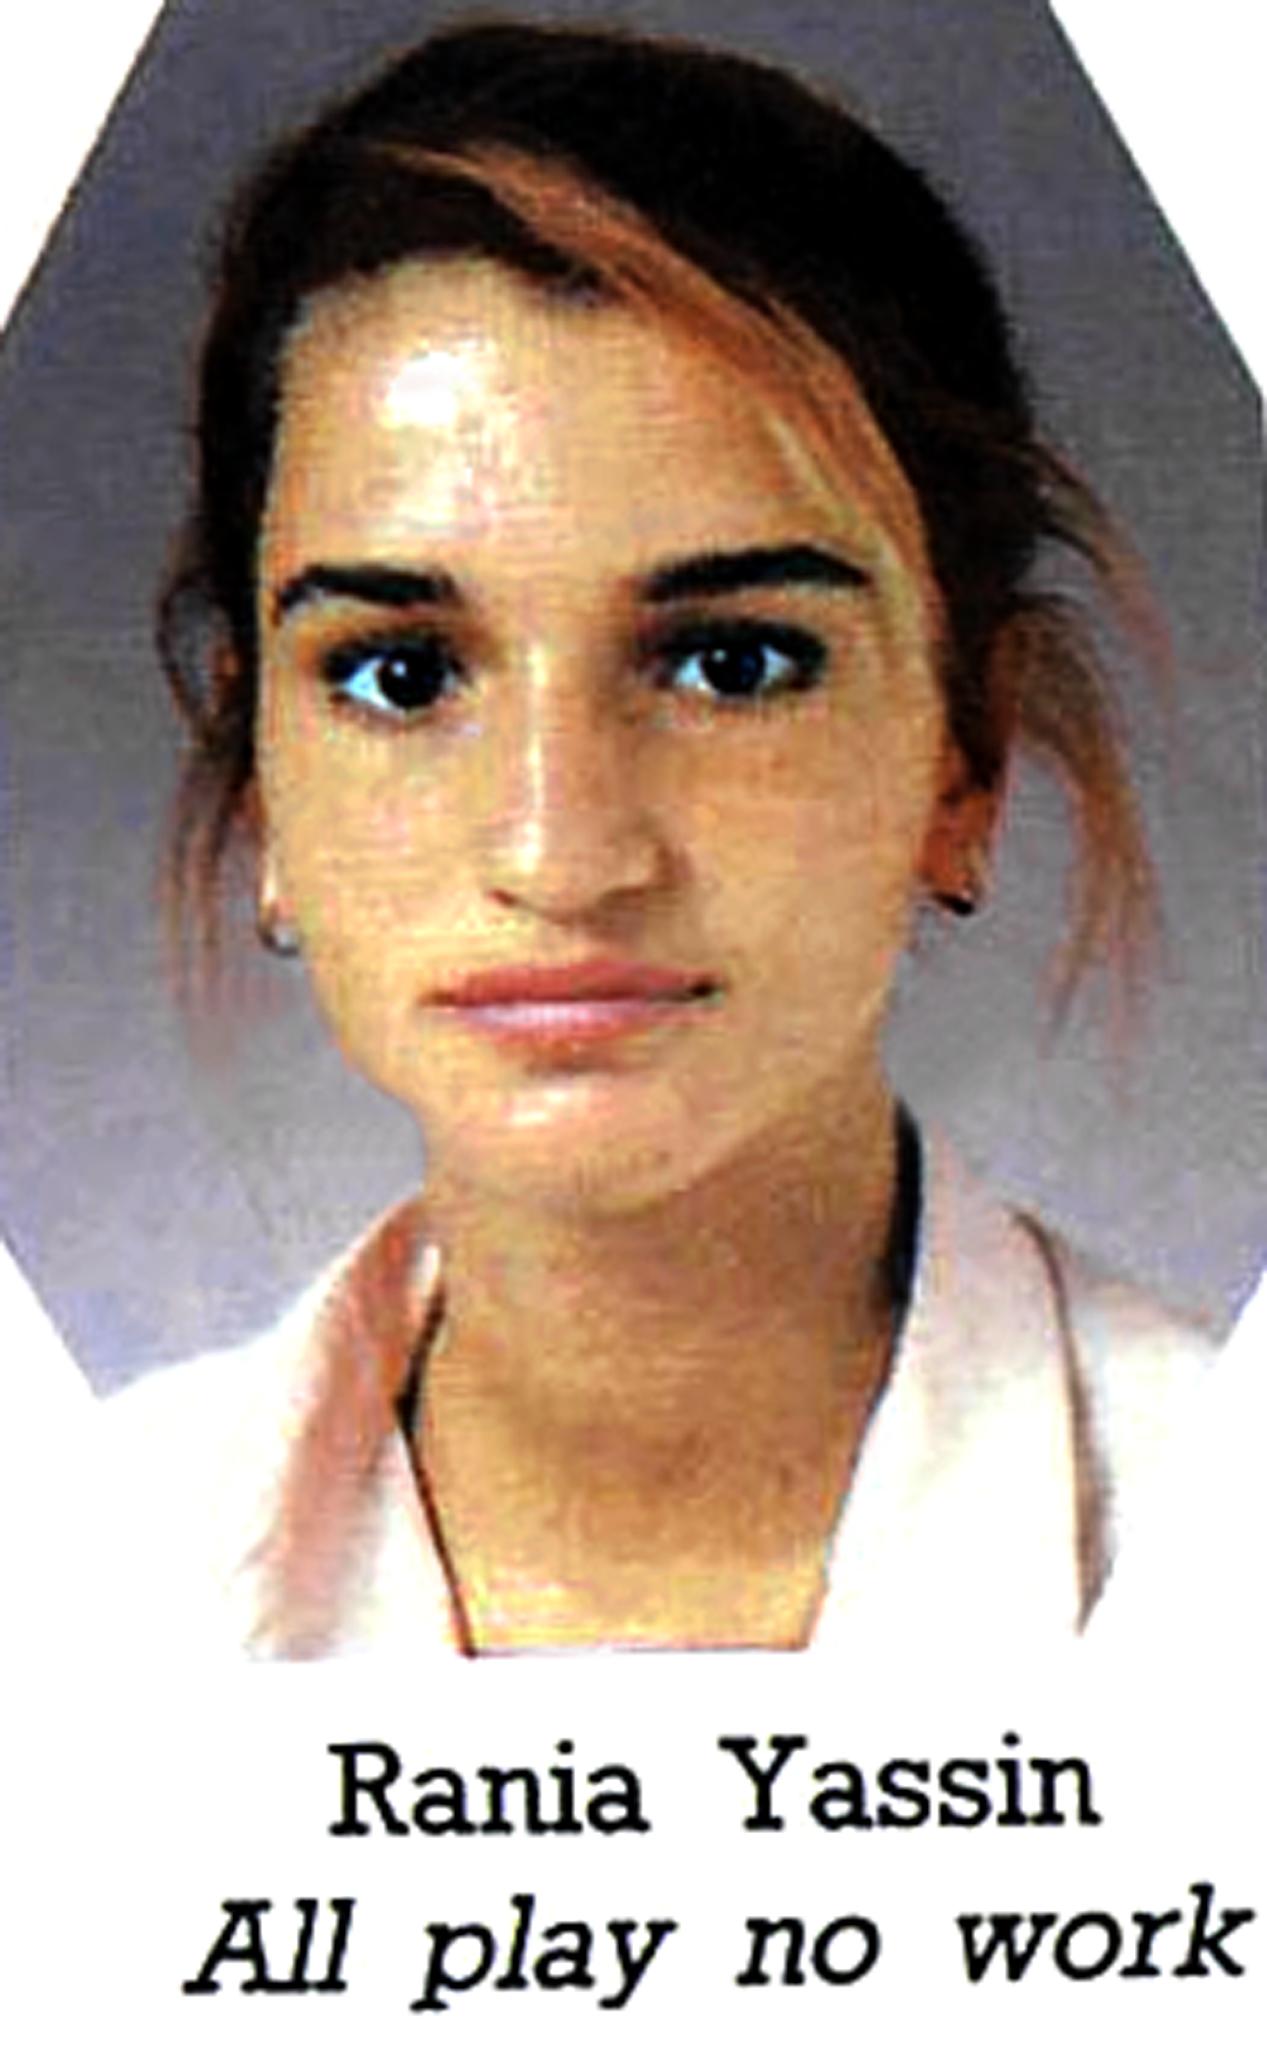 Queen Rania at 17 from the New English School's yearbook. | Source: Getty Images